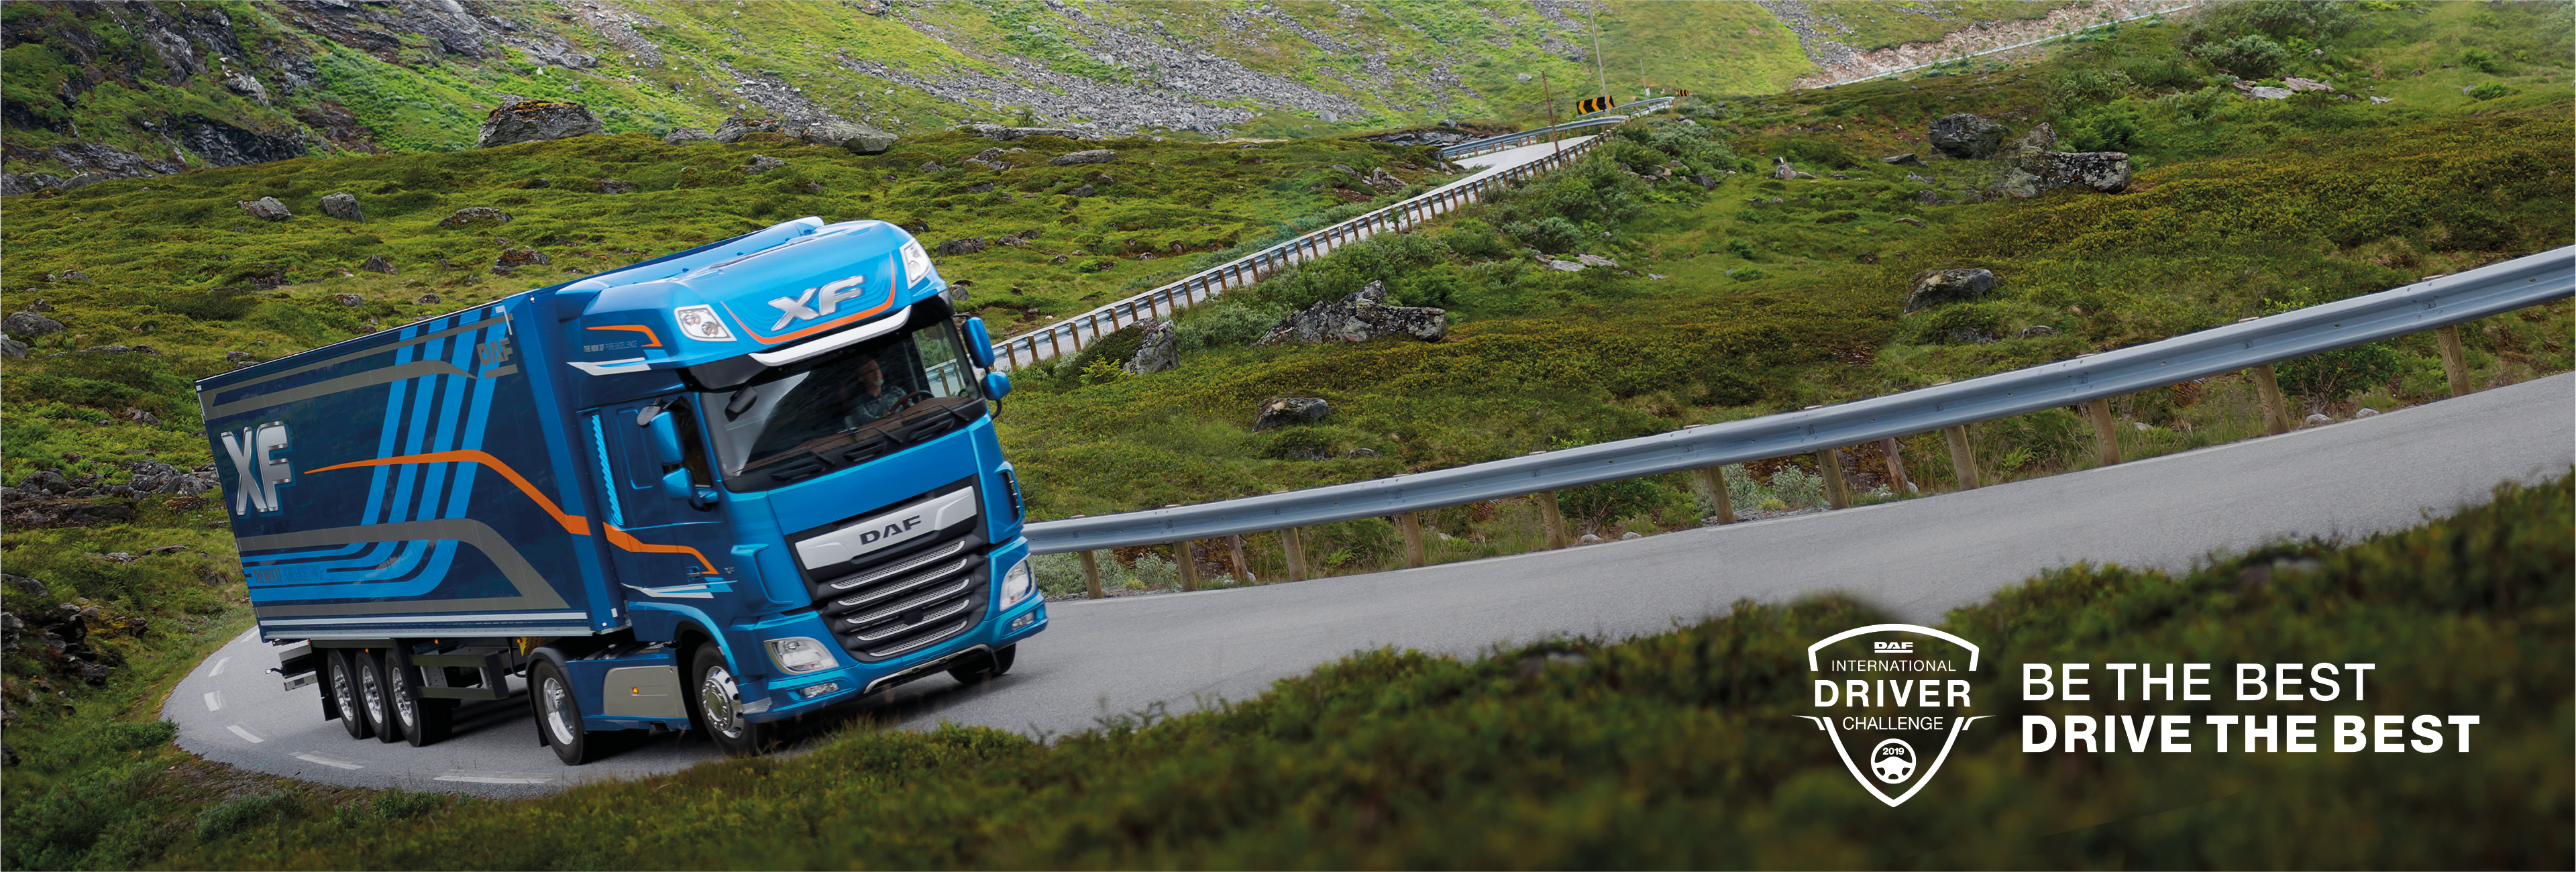 The-search-for-the-International-DAF-Driver-Champion-starts-now-02